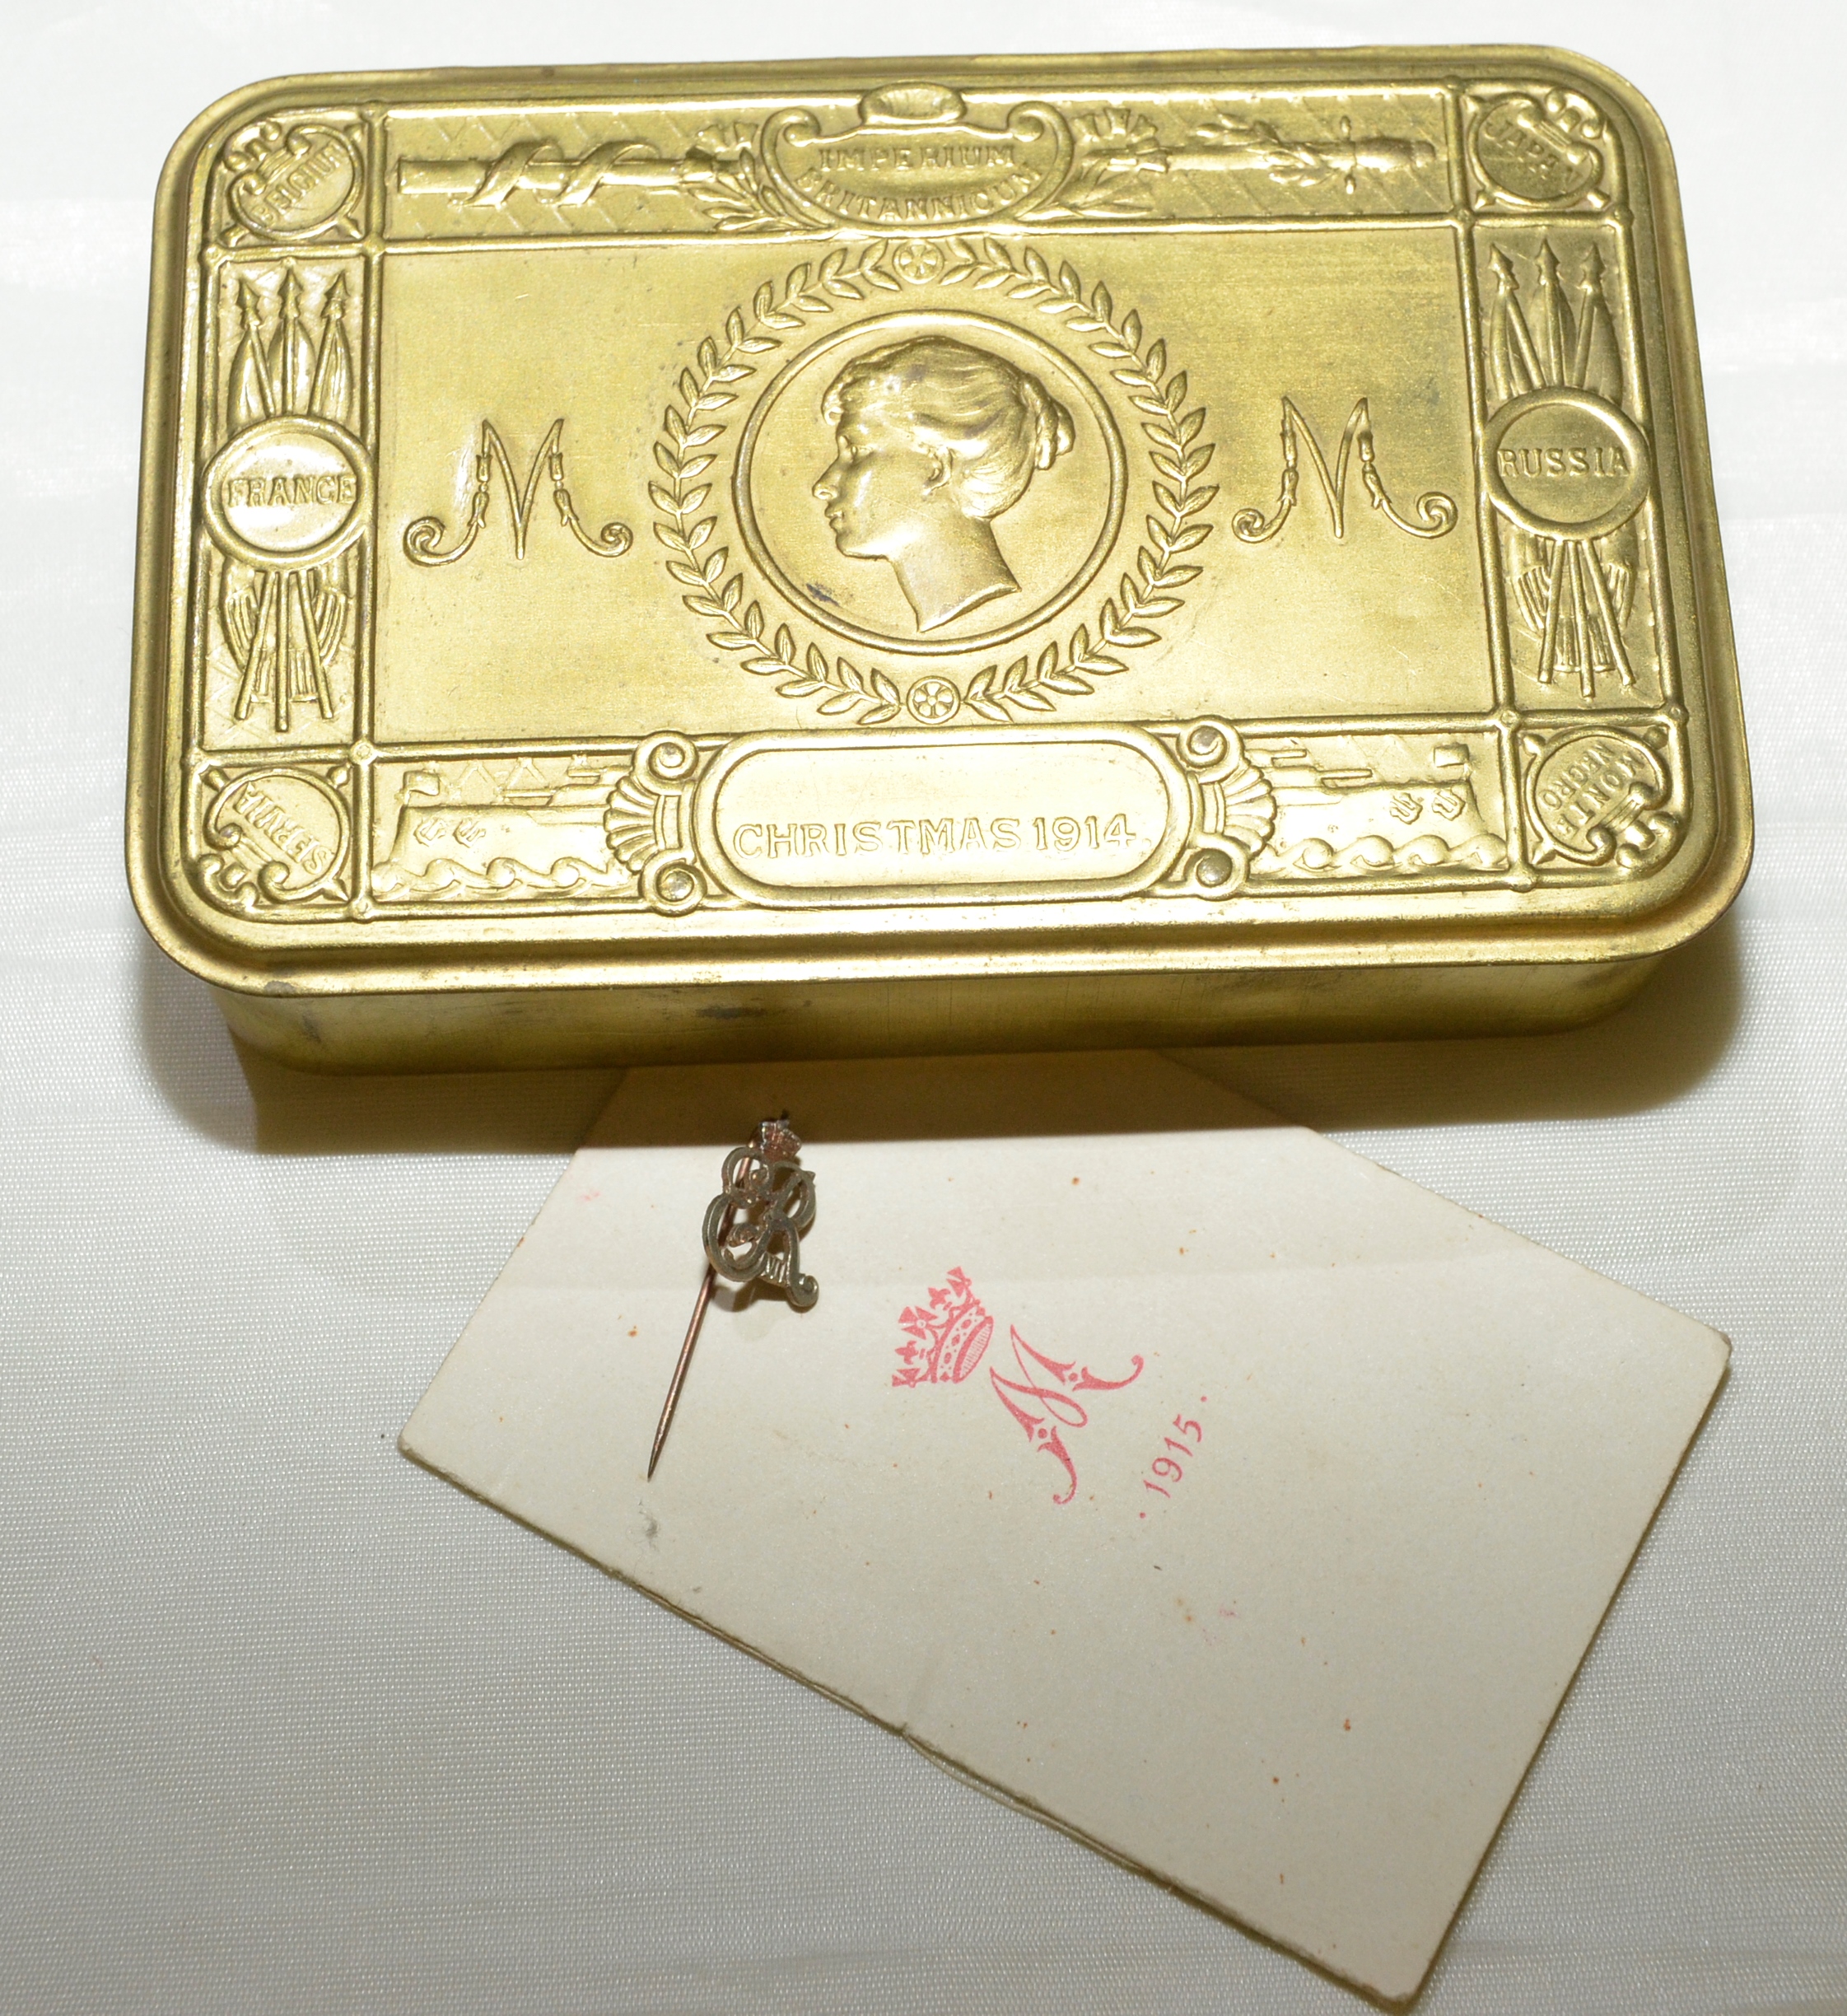 1914 chocolate tin with original Queen Mary presentation card and a ER IIV lapel badge